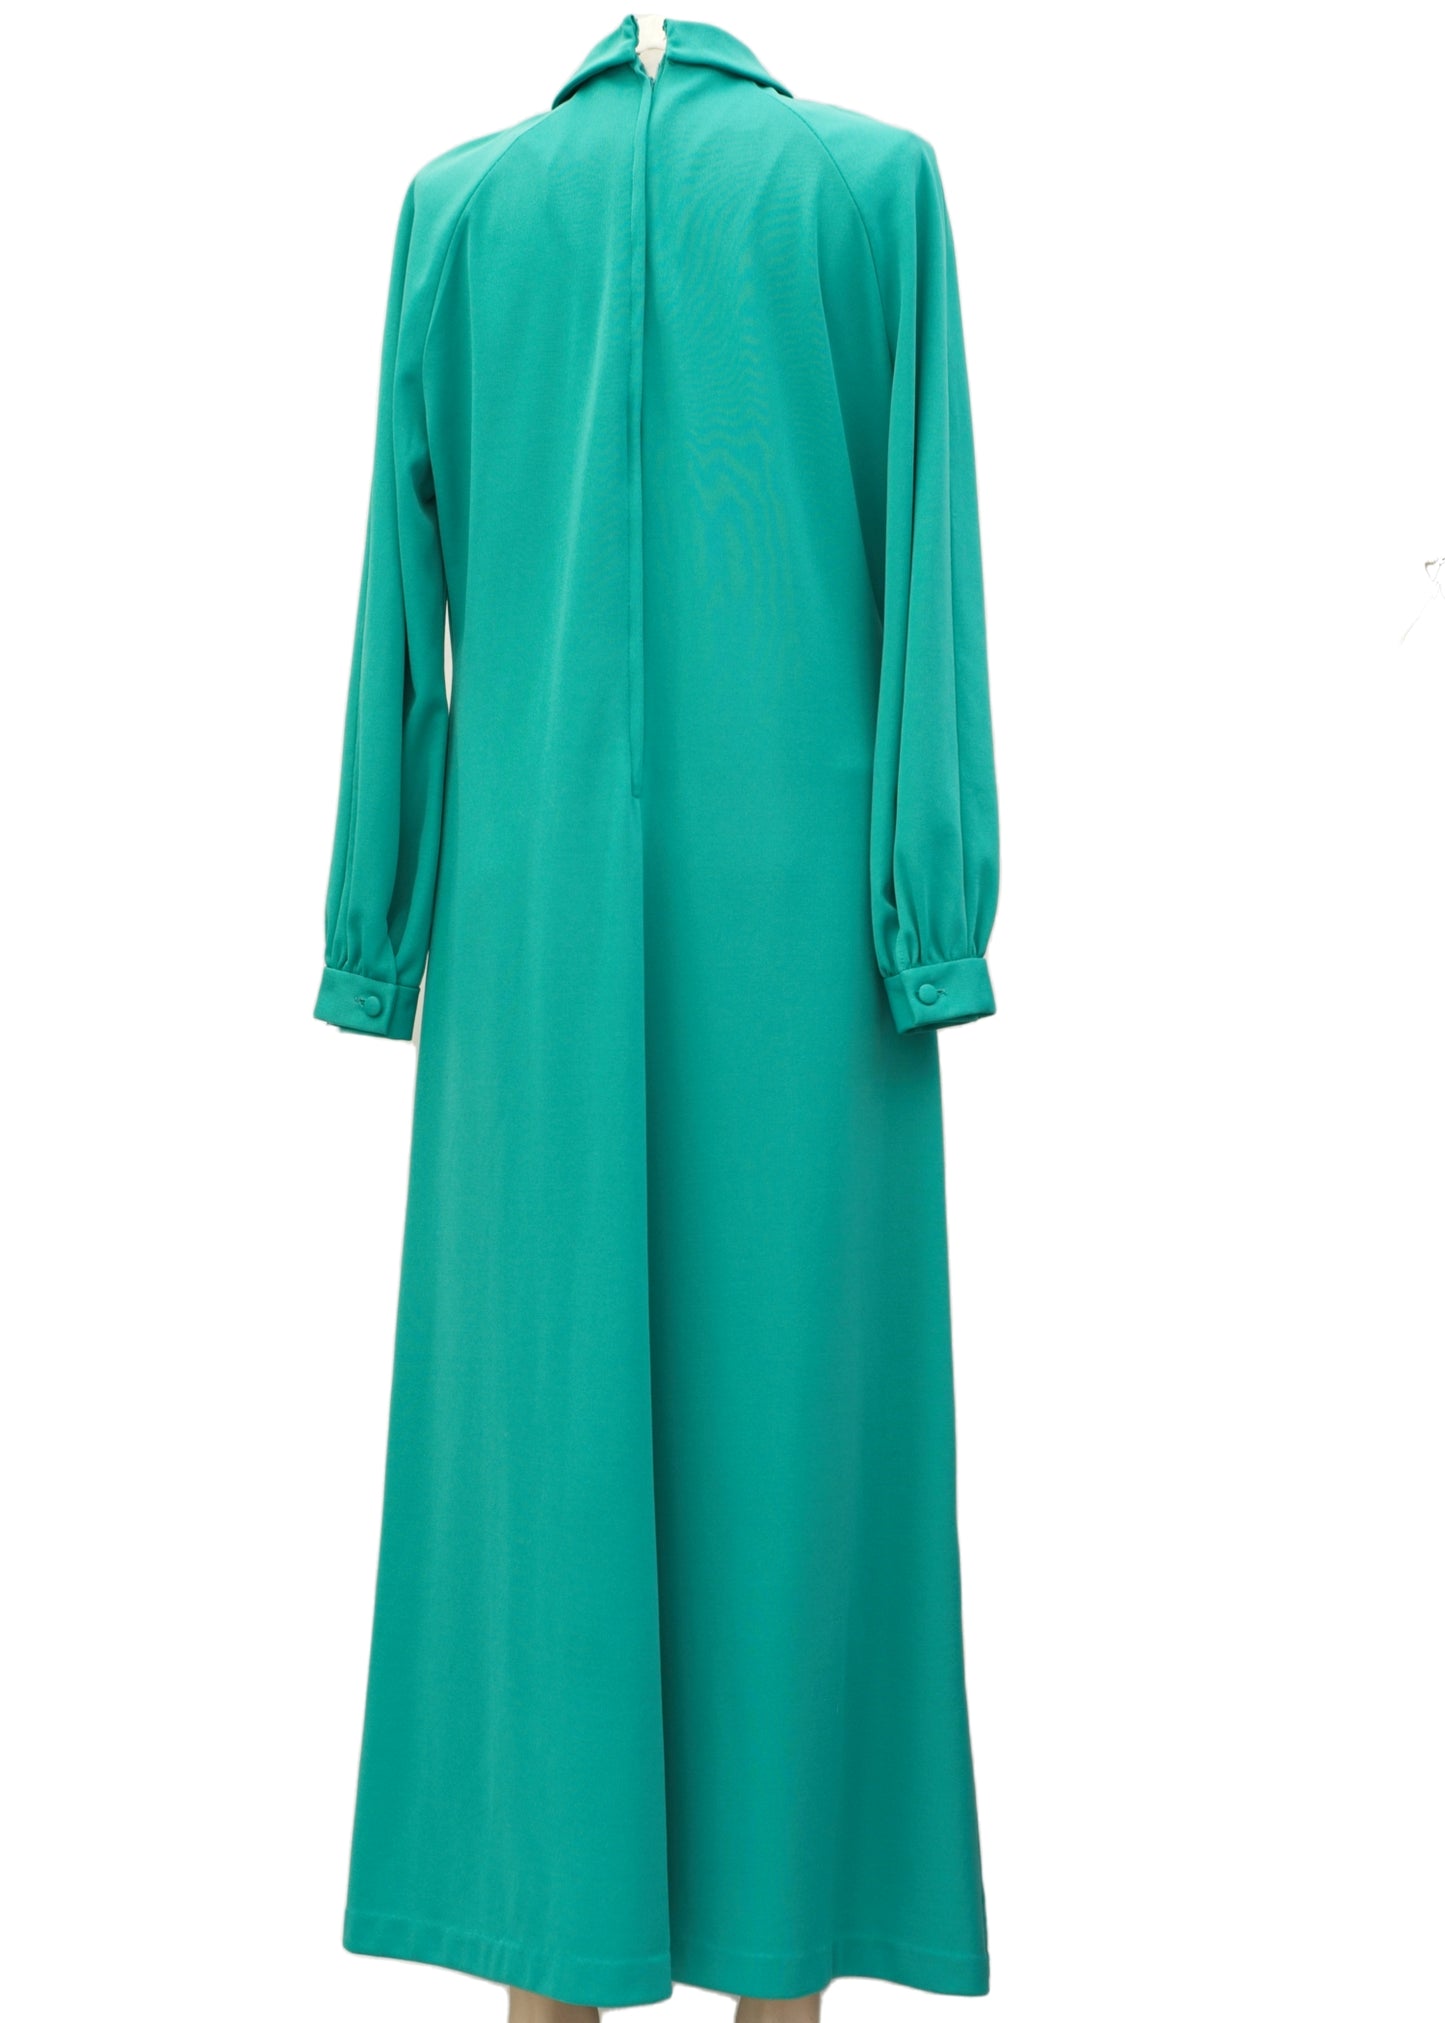 1970s Norman Linton Turquoise Green Maxi Dress